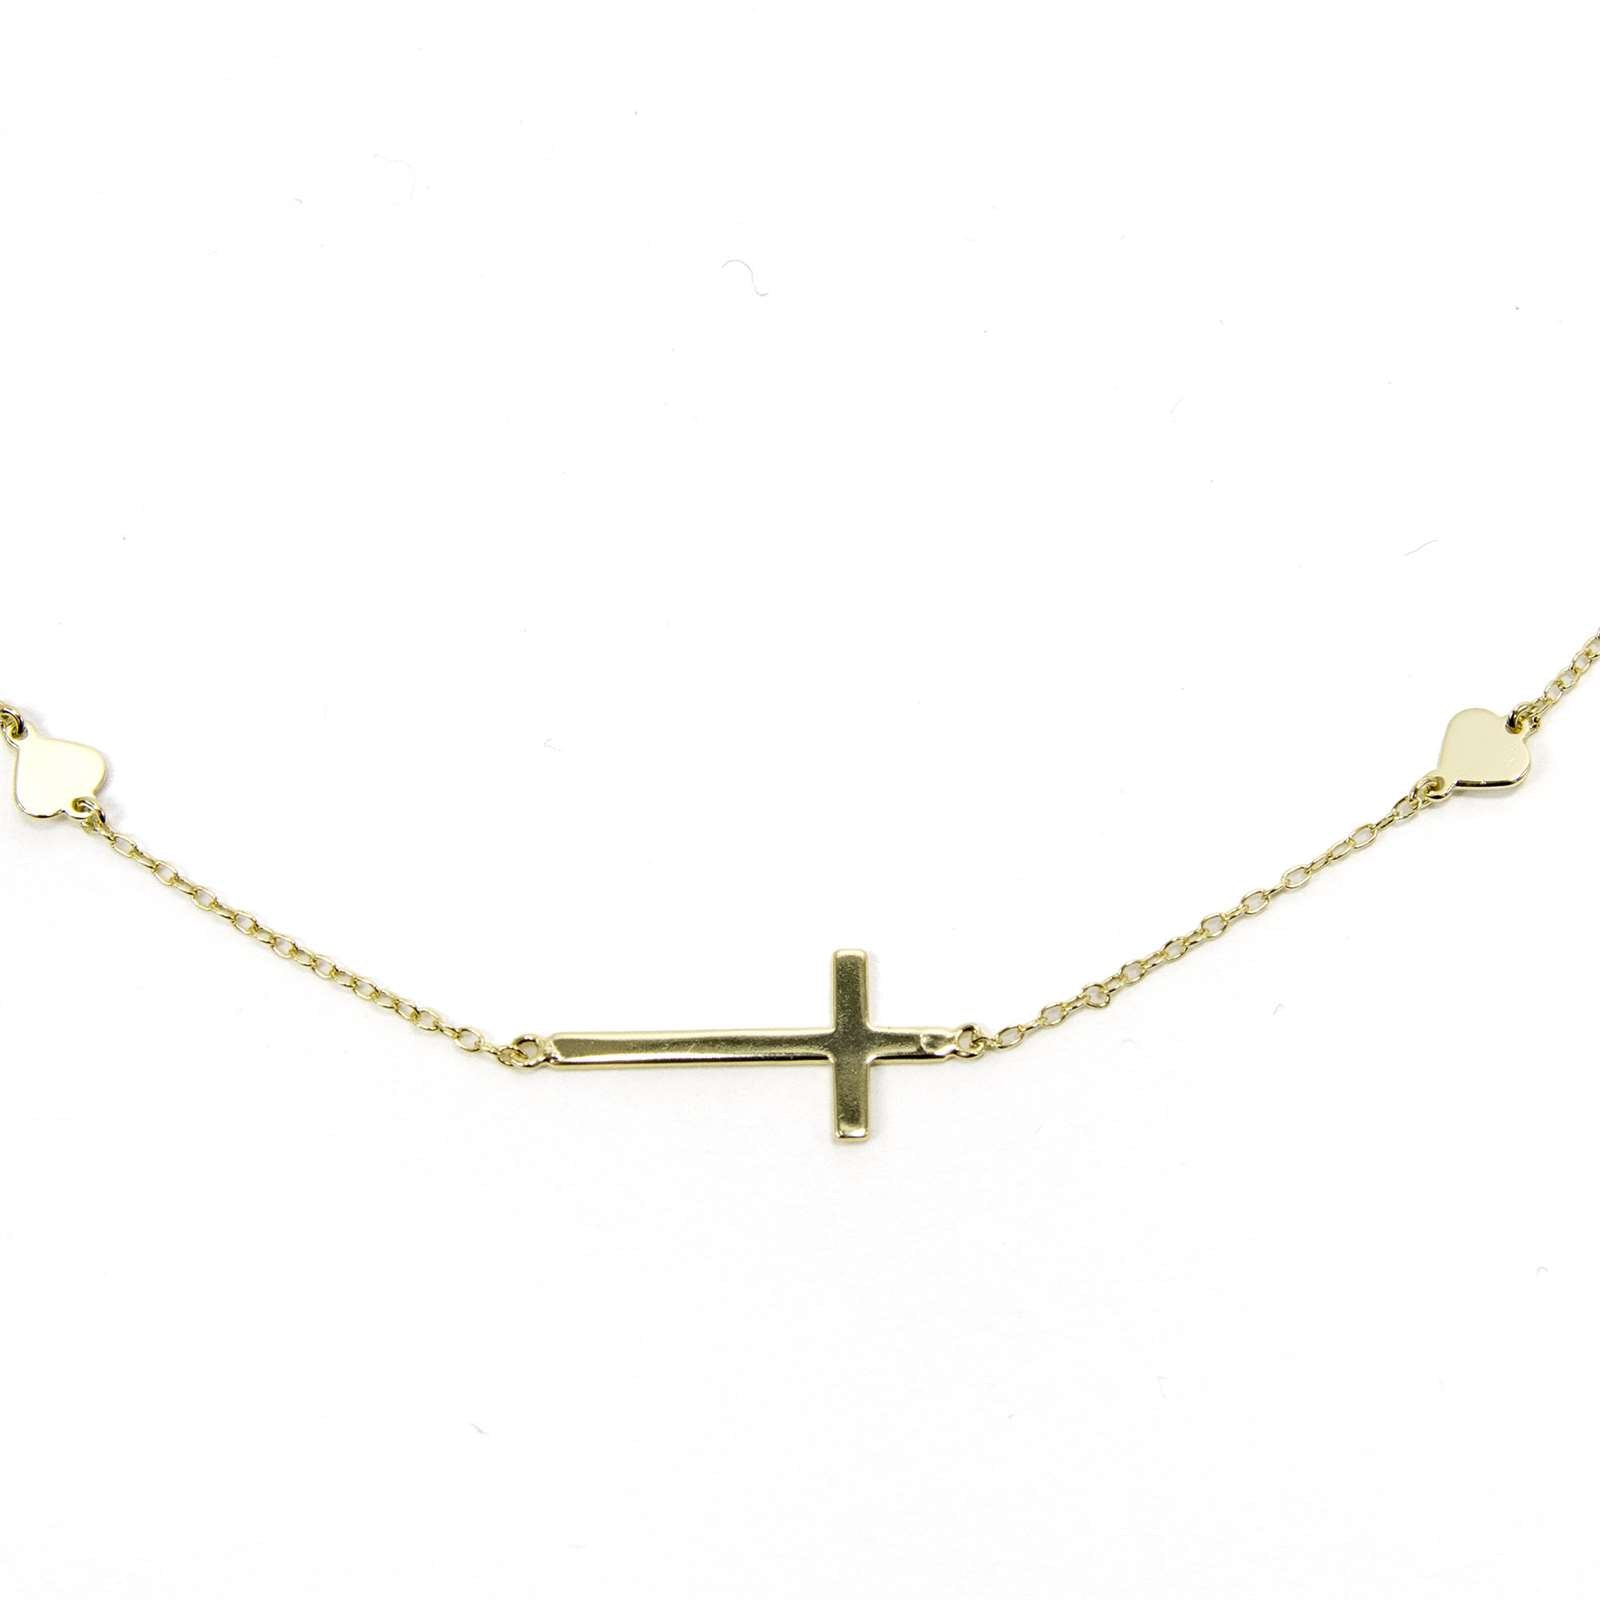 Athra Women Sideways Cross Necklace With Extension